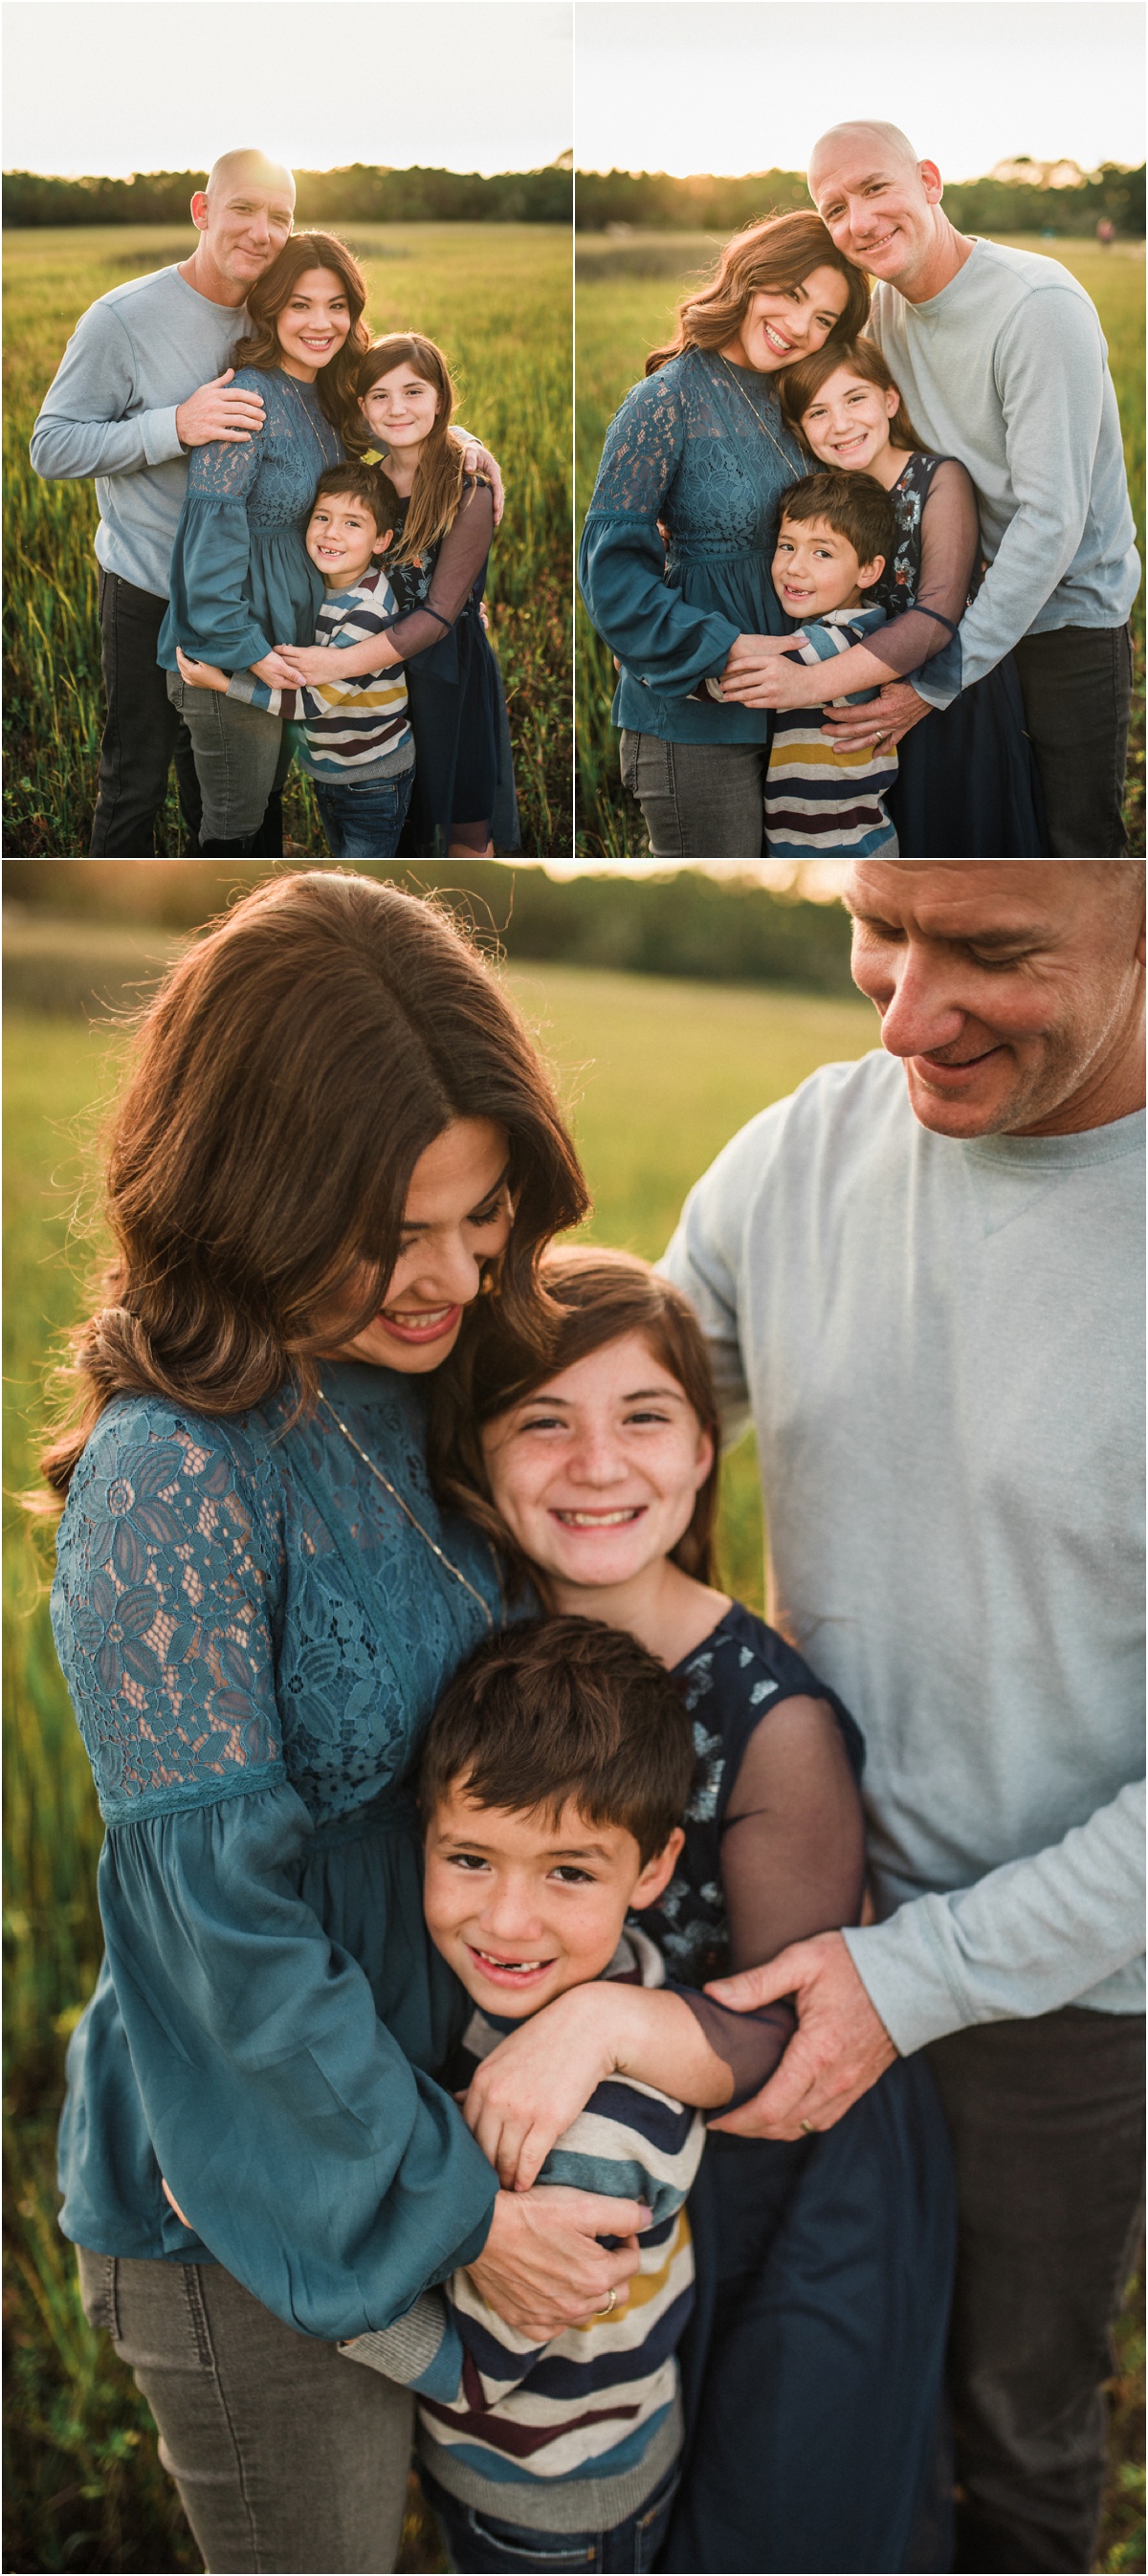 7 Creative Family Portrait Ideas You Can Make Your Own